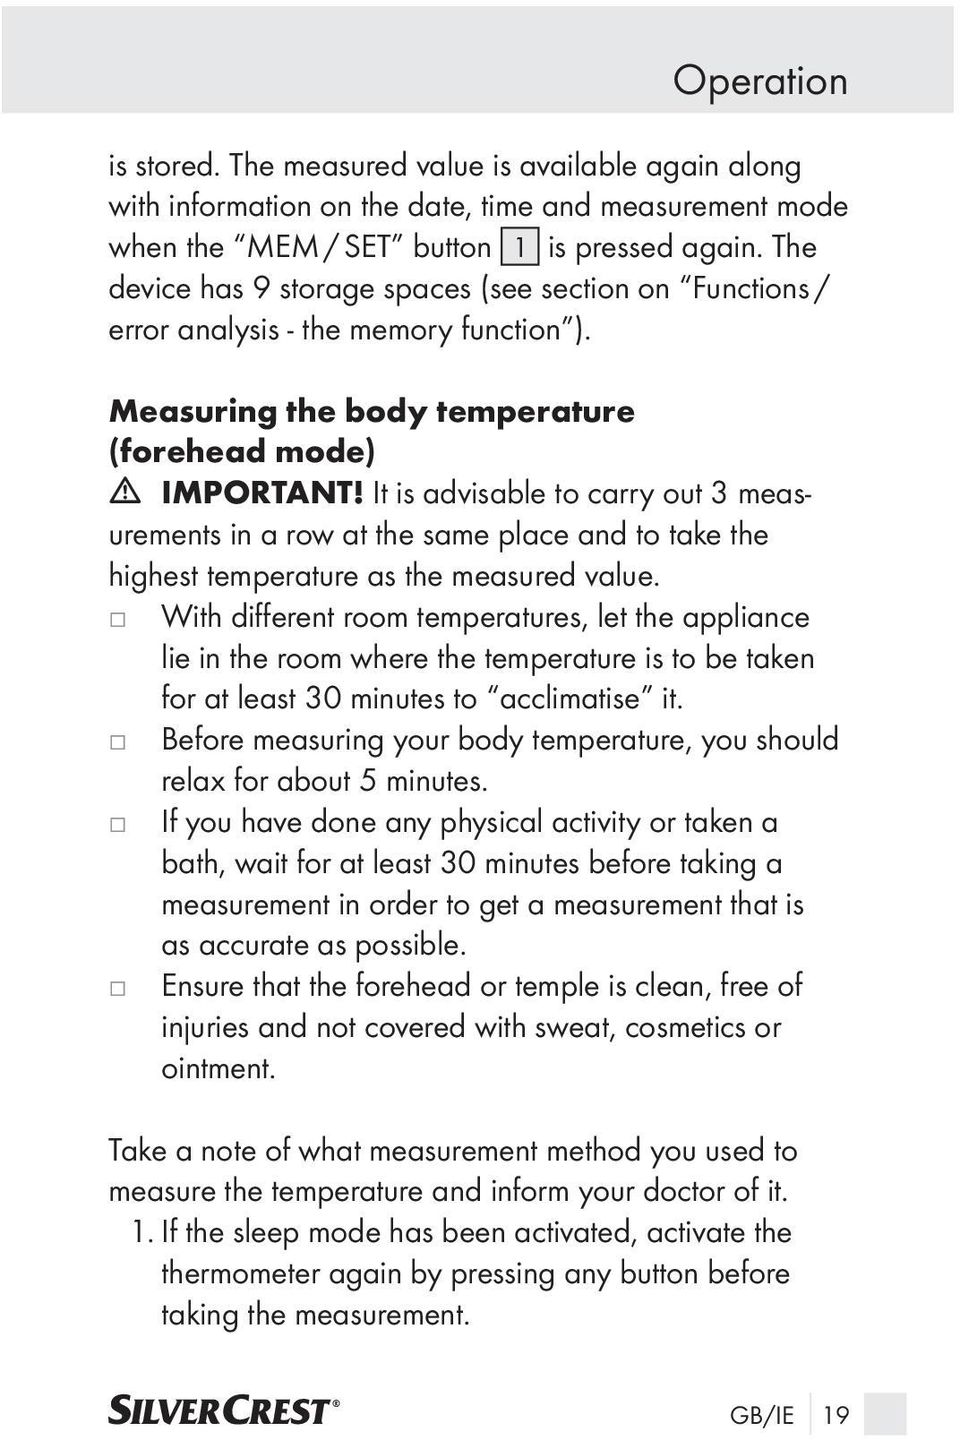 It is advisable to carry out 3 measurements in a row at the same place and to take the highest temperature as the measured value.